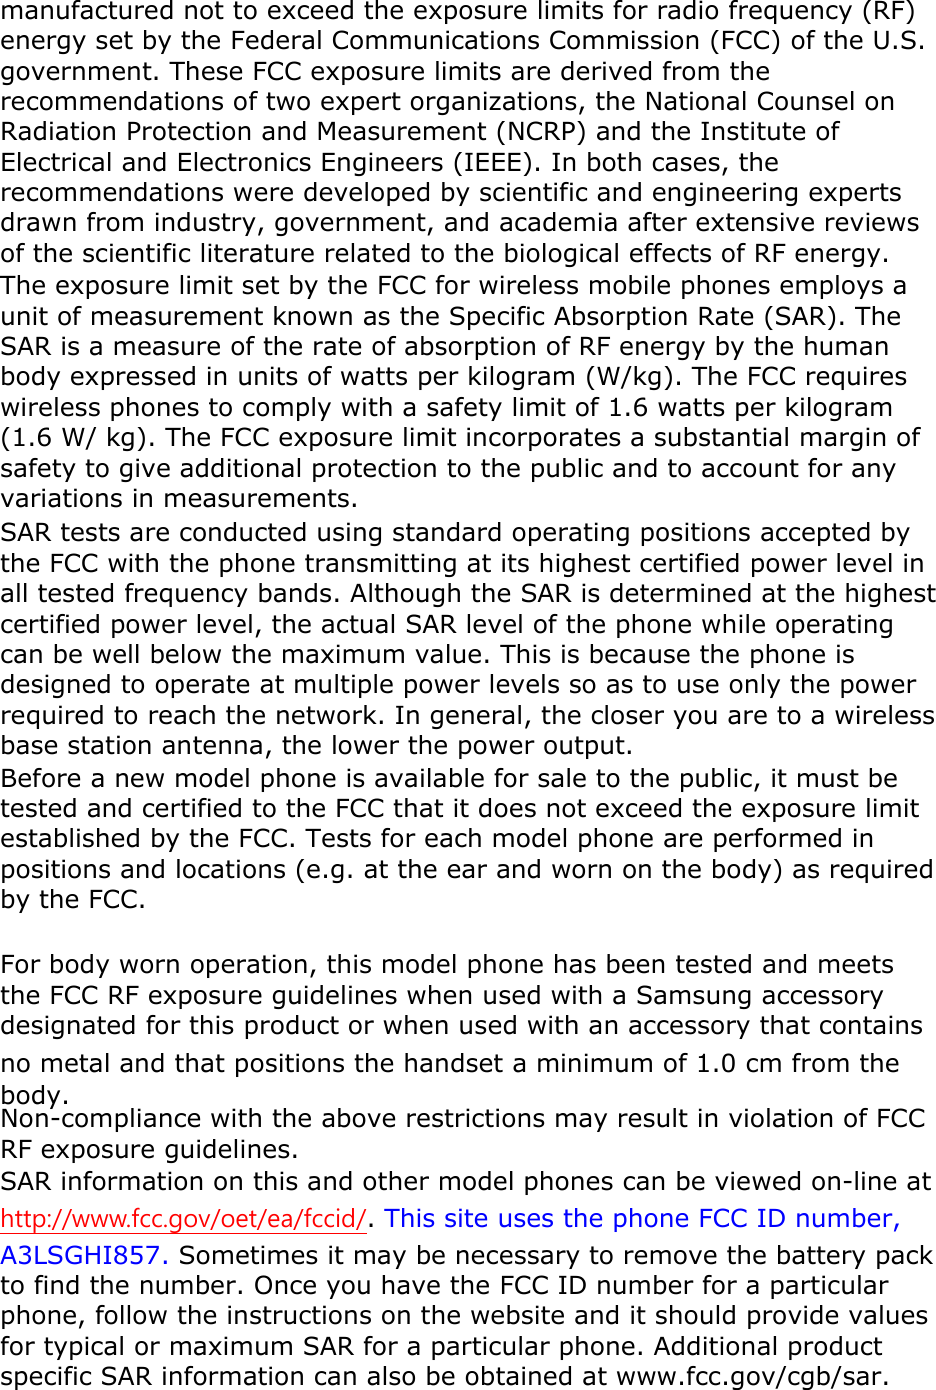 manufactured not to exceed the exposure limits for radio frequency (RF) energy set by the Federal Communications Commission (FCC) of the U.S. government. These FCC exposure limits are derived from the recommendations of two expert organizations, the National Counsel on Radiation Protection and Measurement (NCRP) and the Institute of Electrical and Electronics Engineers (IEEE). In both cases, the recommendations were developed by scientific and engineering experts drawn from industry, government, and academia after extensive reviews of the scientific literature related to the biological effects of RF energy. The exposure limit set by the FCC for wireless mobile phones employs a unit of measurement known as the Specific Absorption Rate (SAR). The SAR is a measure of the rate of absorption of RF energy by the human body expressed in units of watts per kilogram (W/kg). The FCC requires wireless phones to comply with a safety limit of 1.6 watts per kilogram (1.6 W/ kg). The FCC exposure limit incorporates a substantial margin of safety to give additional protection to the public and to account for any variations in measurements. SAR tests are conducted using standard operating positions accepted by the FCC with the phone transmitting at its highest certified power level in all tested frequency bands. Although the SAR is determined at the highest certified power level, the actual SAR level of the phone while operating can be well below the maximum value. This is because the phone is designed to operate at multiple power levels so as to use only the power required to reach the network. In general, the closer you are to a wireless base station antenna, the lower the power output. Before a new model phone is available for sale to the public, it must be tested and certified to the FCC that it does not exceed the exposure limit established by the FCC. Tests for each model phone are performed in positions and locations (e.g. at the ear and worn on the body) as required by the FCC.      For body worn operation, this model phone has been tested and meets the FCC RF exposure guidelines when used with a Samsung accessory designated for this product or when used with an accessory that contains no metal and that positions the handset a minimum of 1.0 cm from the body.   Non-compliance with the above restrictions may result in violation of FCC RF exposure guidelines. SAR information on this and other model phones can be viewed on-line at http://www.fcc.gov/oet/ea/fccid/. This site uses the phone FCC ID number, A3LSGHI857. Sometimes it may be necessary to remove the battery pack to find the number. Once you have the FCC ID number for a particular phone, follow the instructions on the website and it should provide values for typical or maximum SAR for a particular phone. Additional product specific SAR information can also be obtained at www.fcc.gov/cgb/sar. 